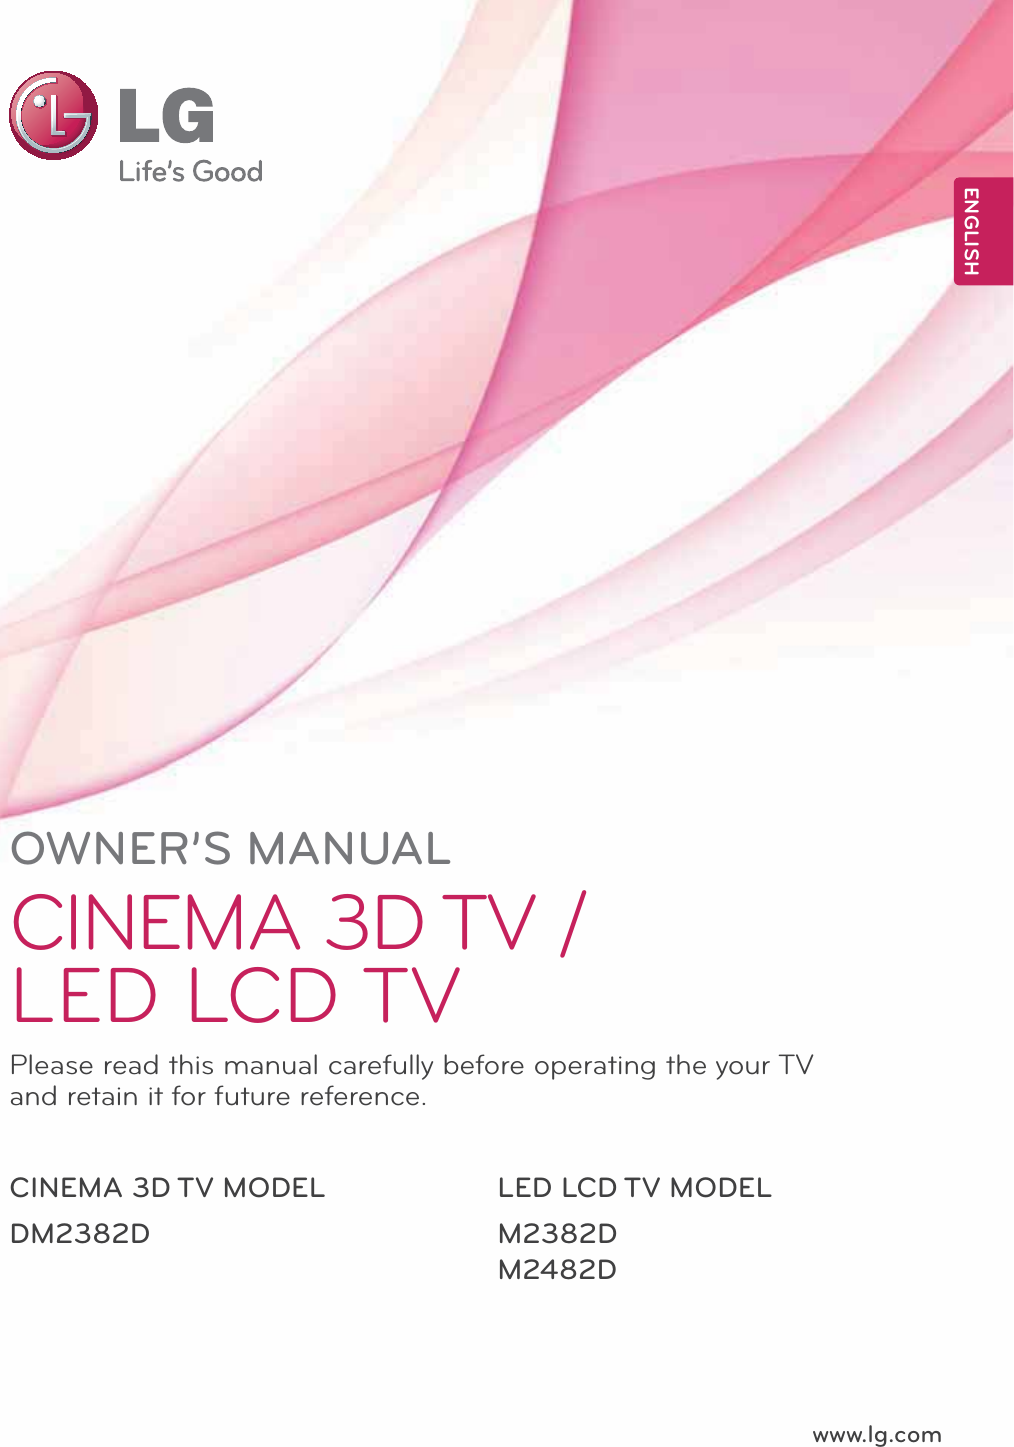 www.lg.comOWNER’S MANUALCINEMA 3D TV / LED LCD TVM2382DM2482DDM2382DPlease read this manual carefully before operating the your TV and retain it for future reference.LED LCD TV MODELCINEMA 3D TV MODEL ENGLISH